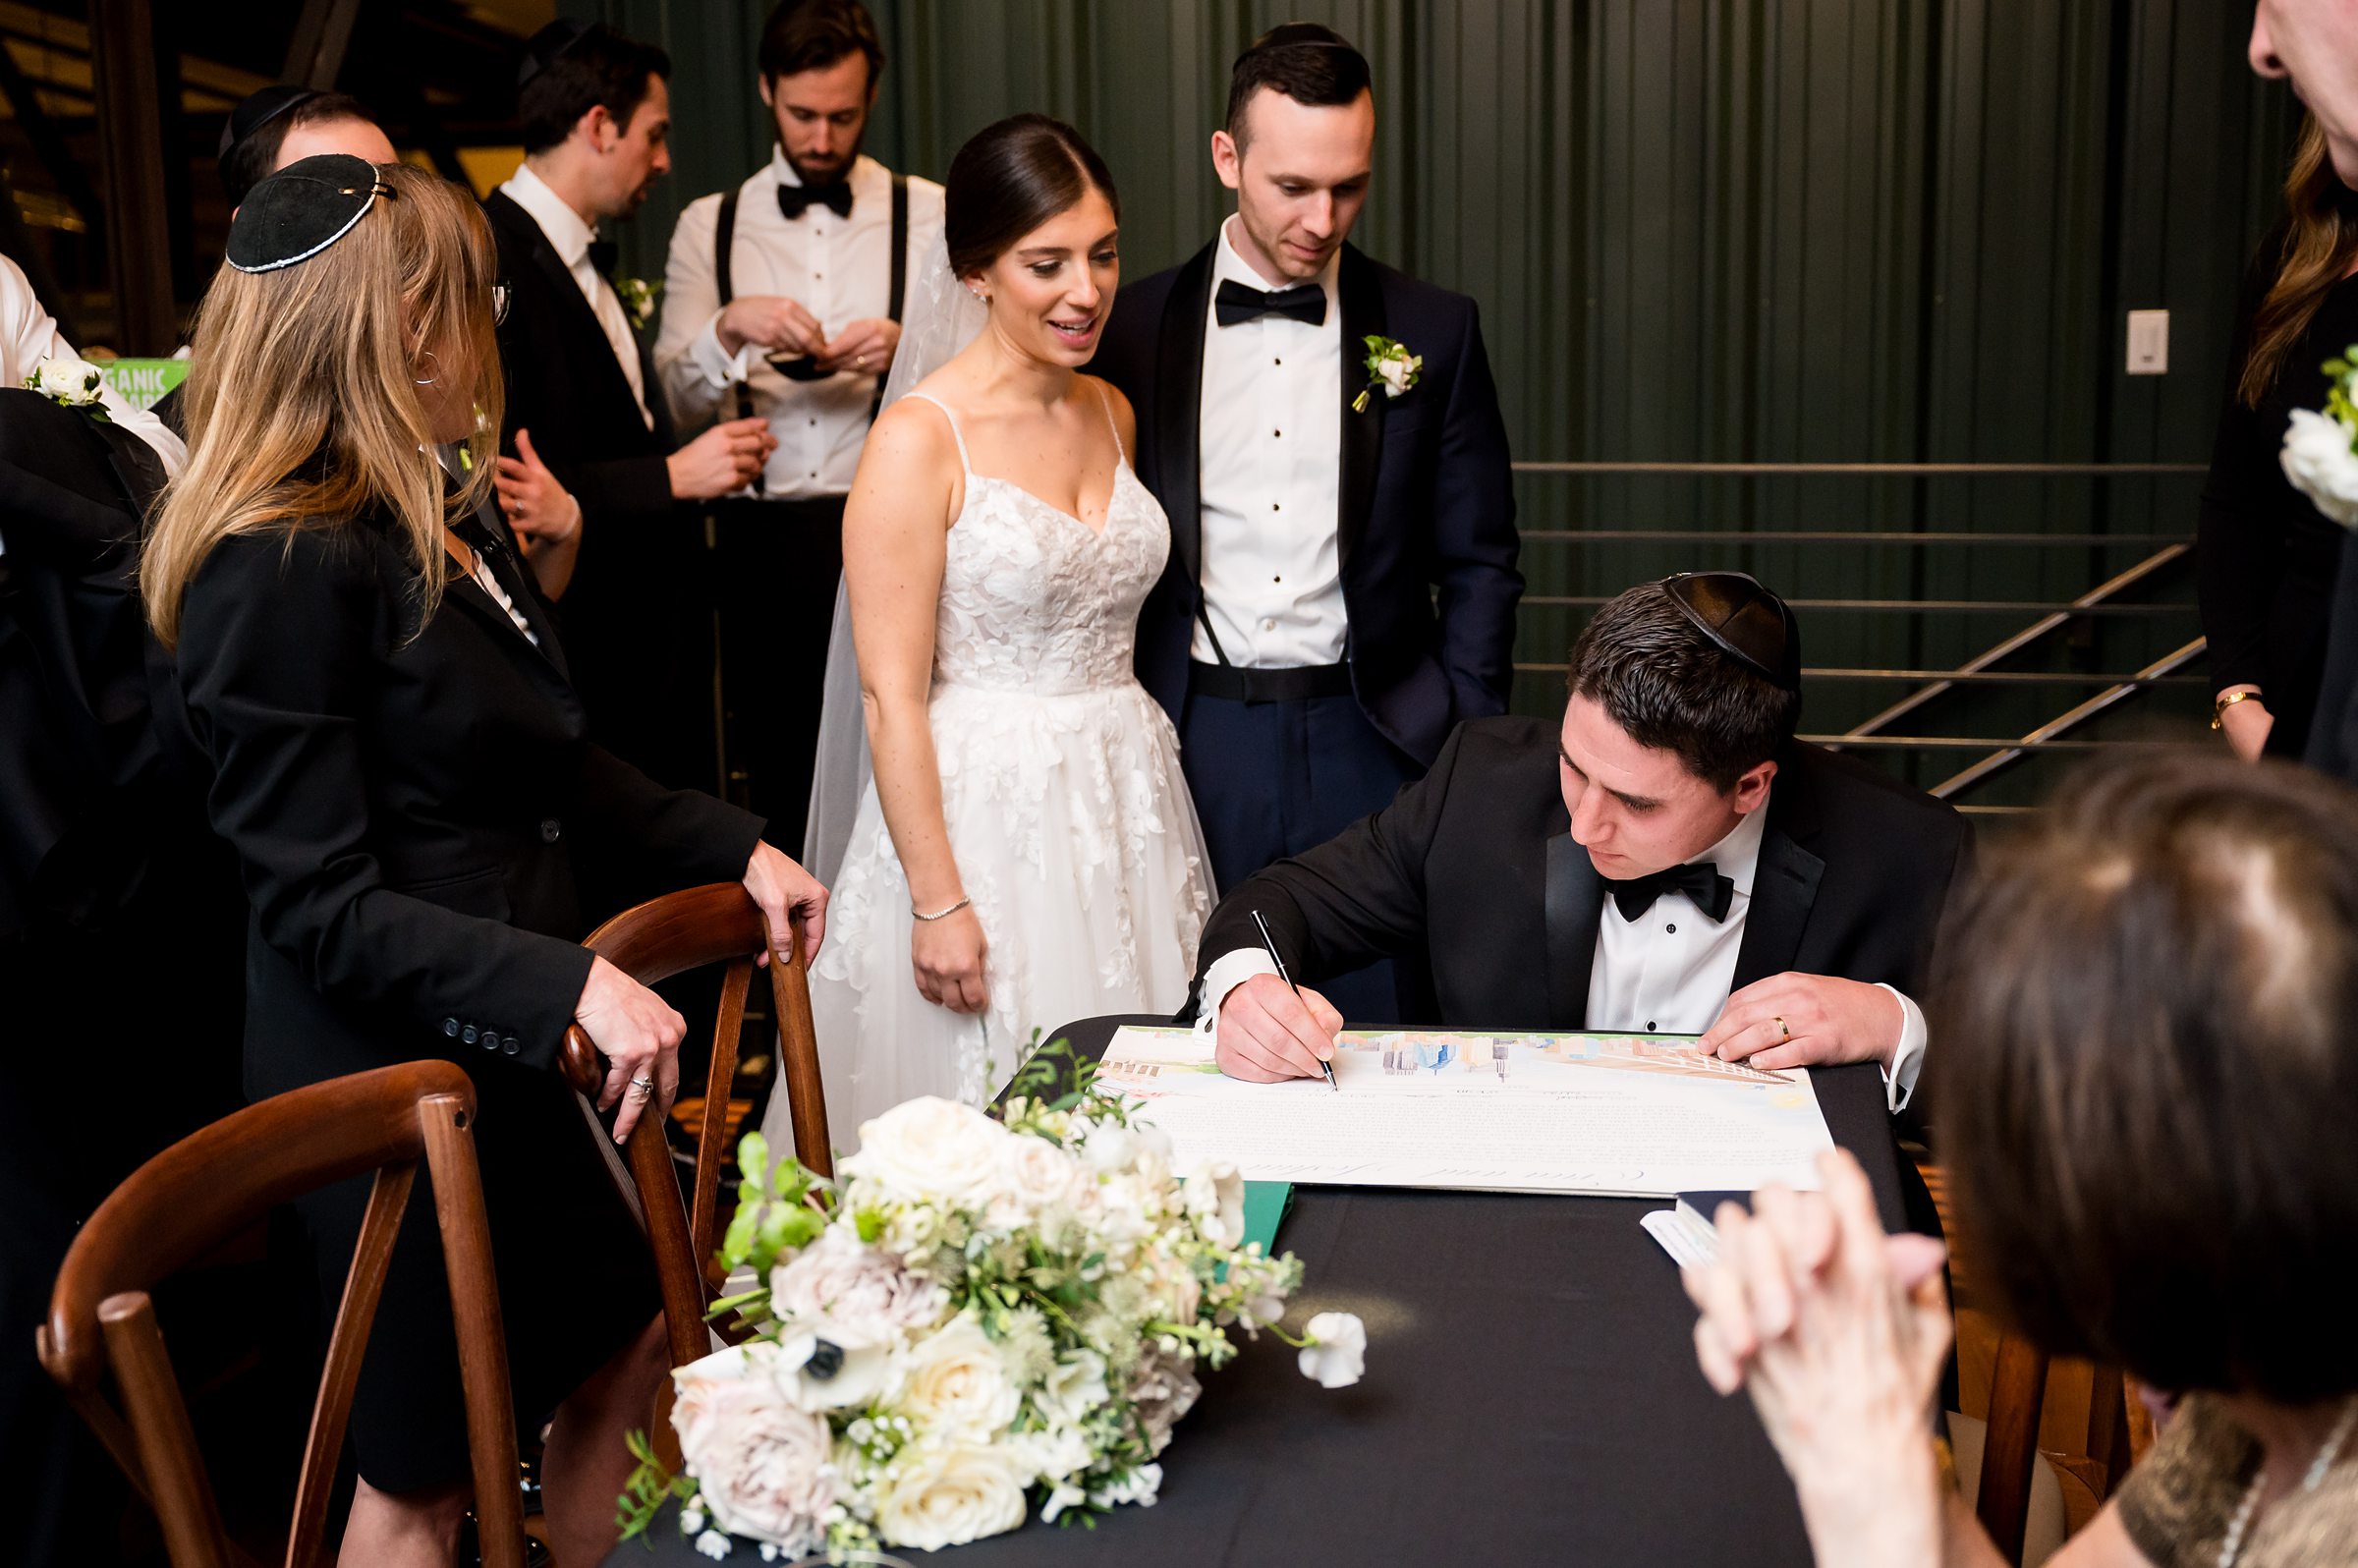 At a Lilah Events wedding, the bride and groom sign their wedding vows.